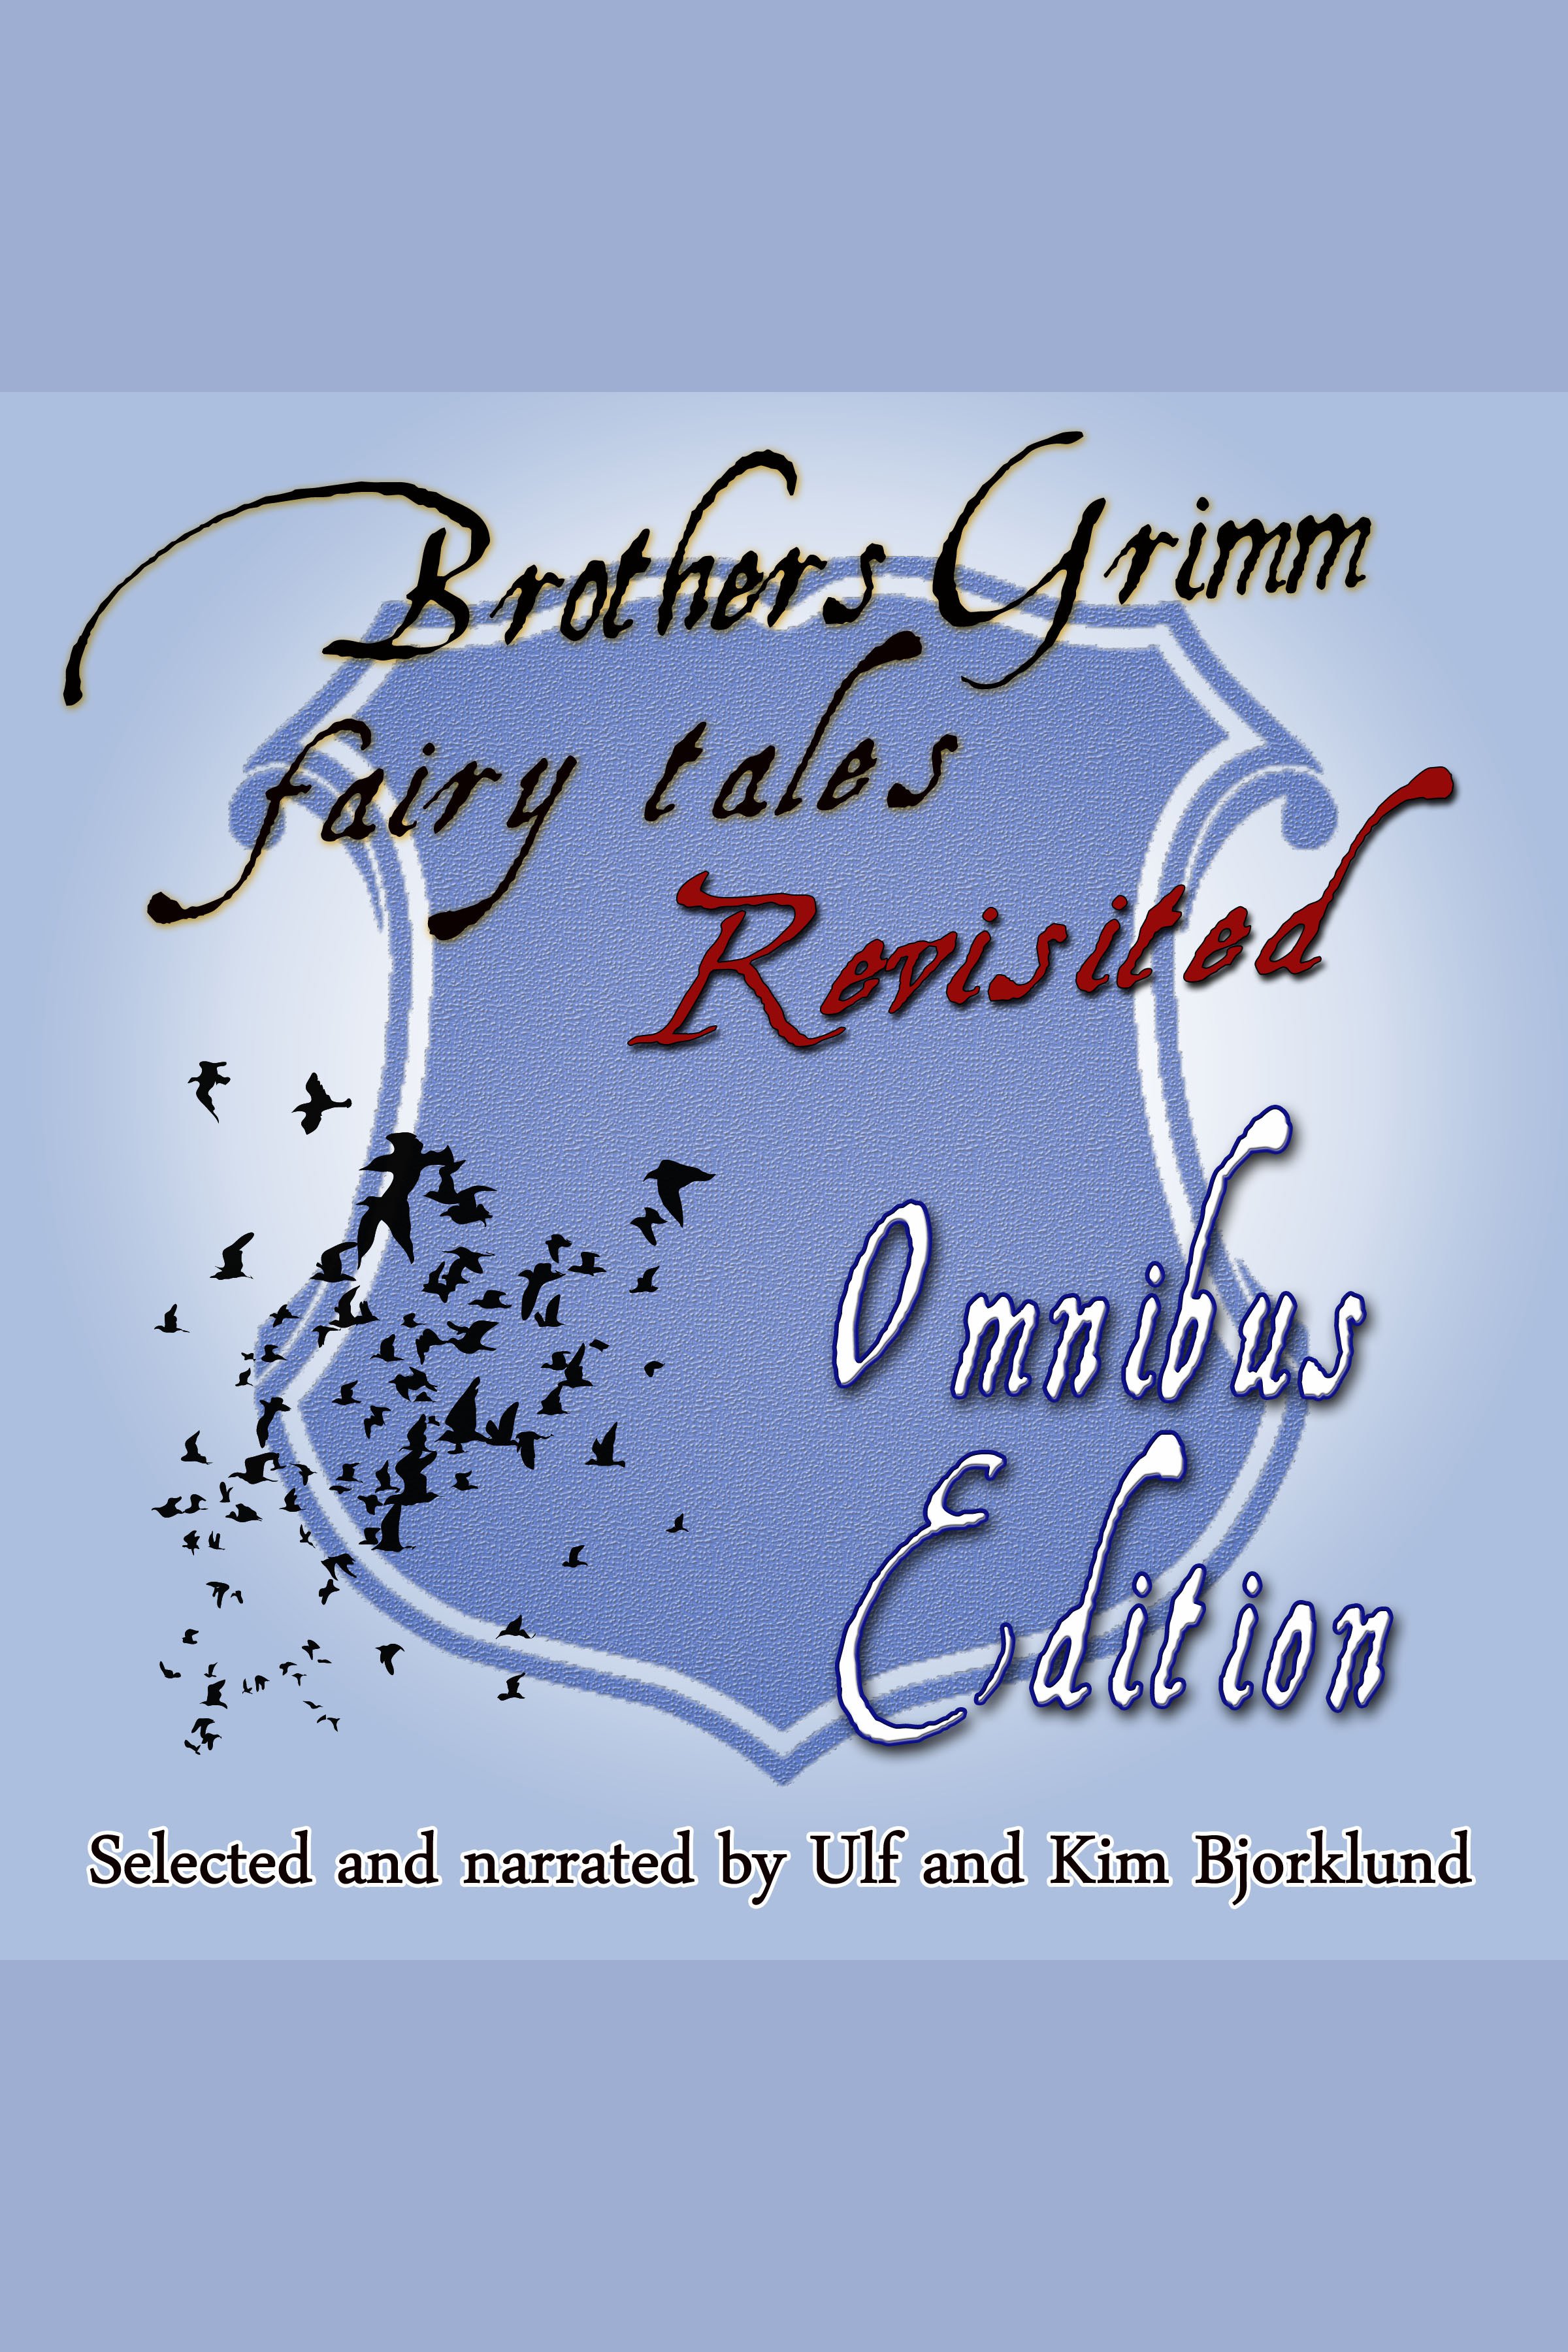 Brothers Grimm fairy tales cover image